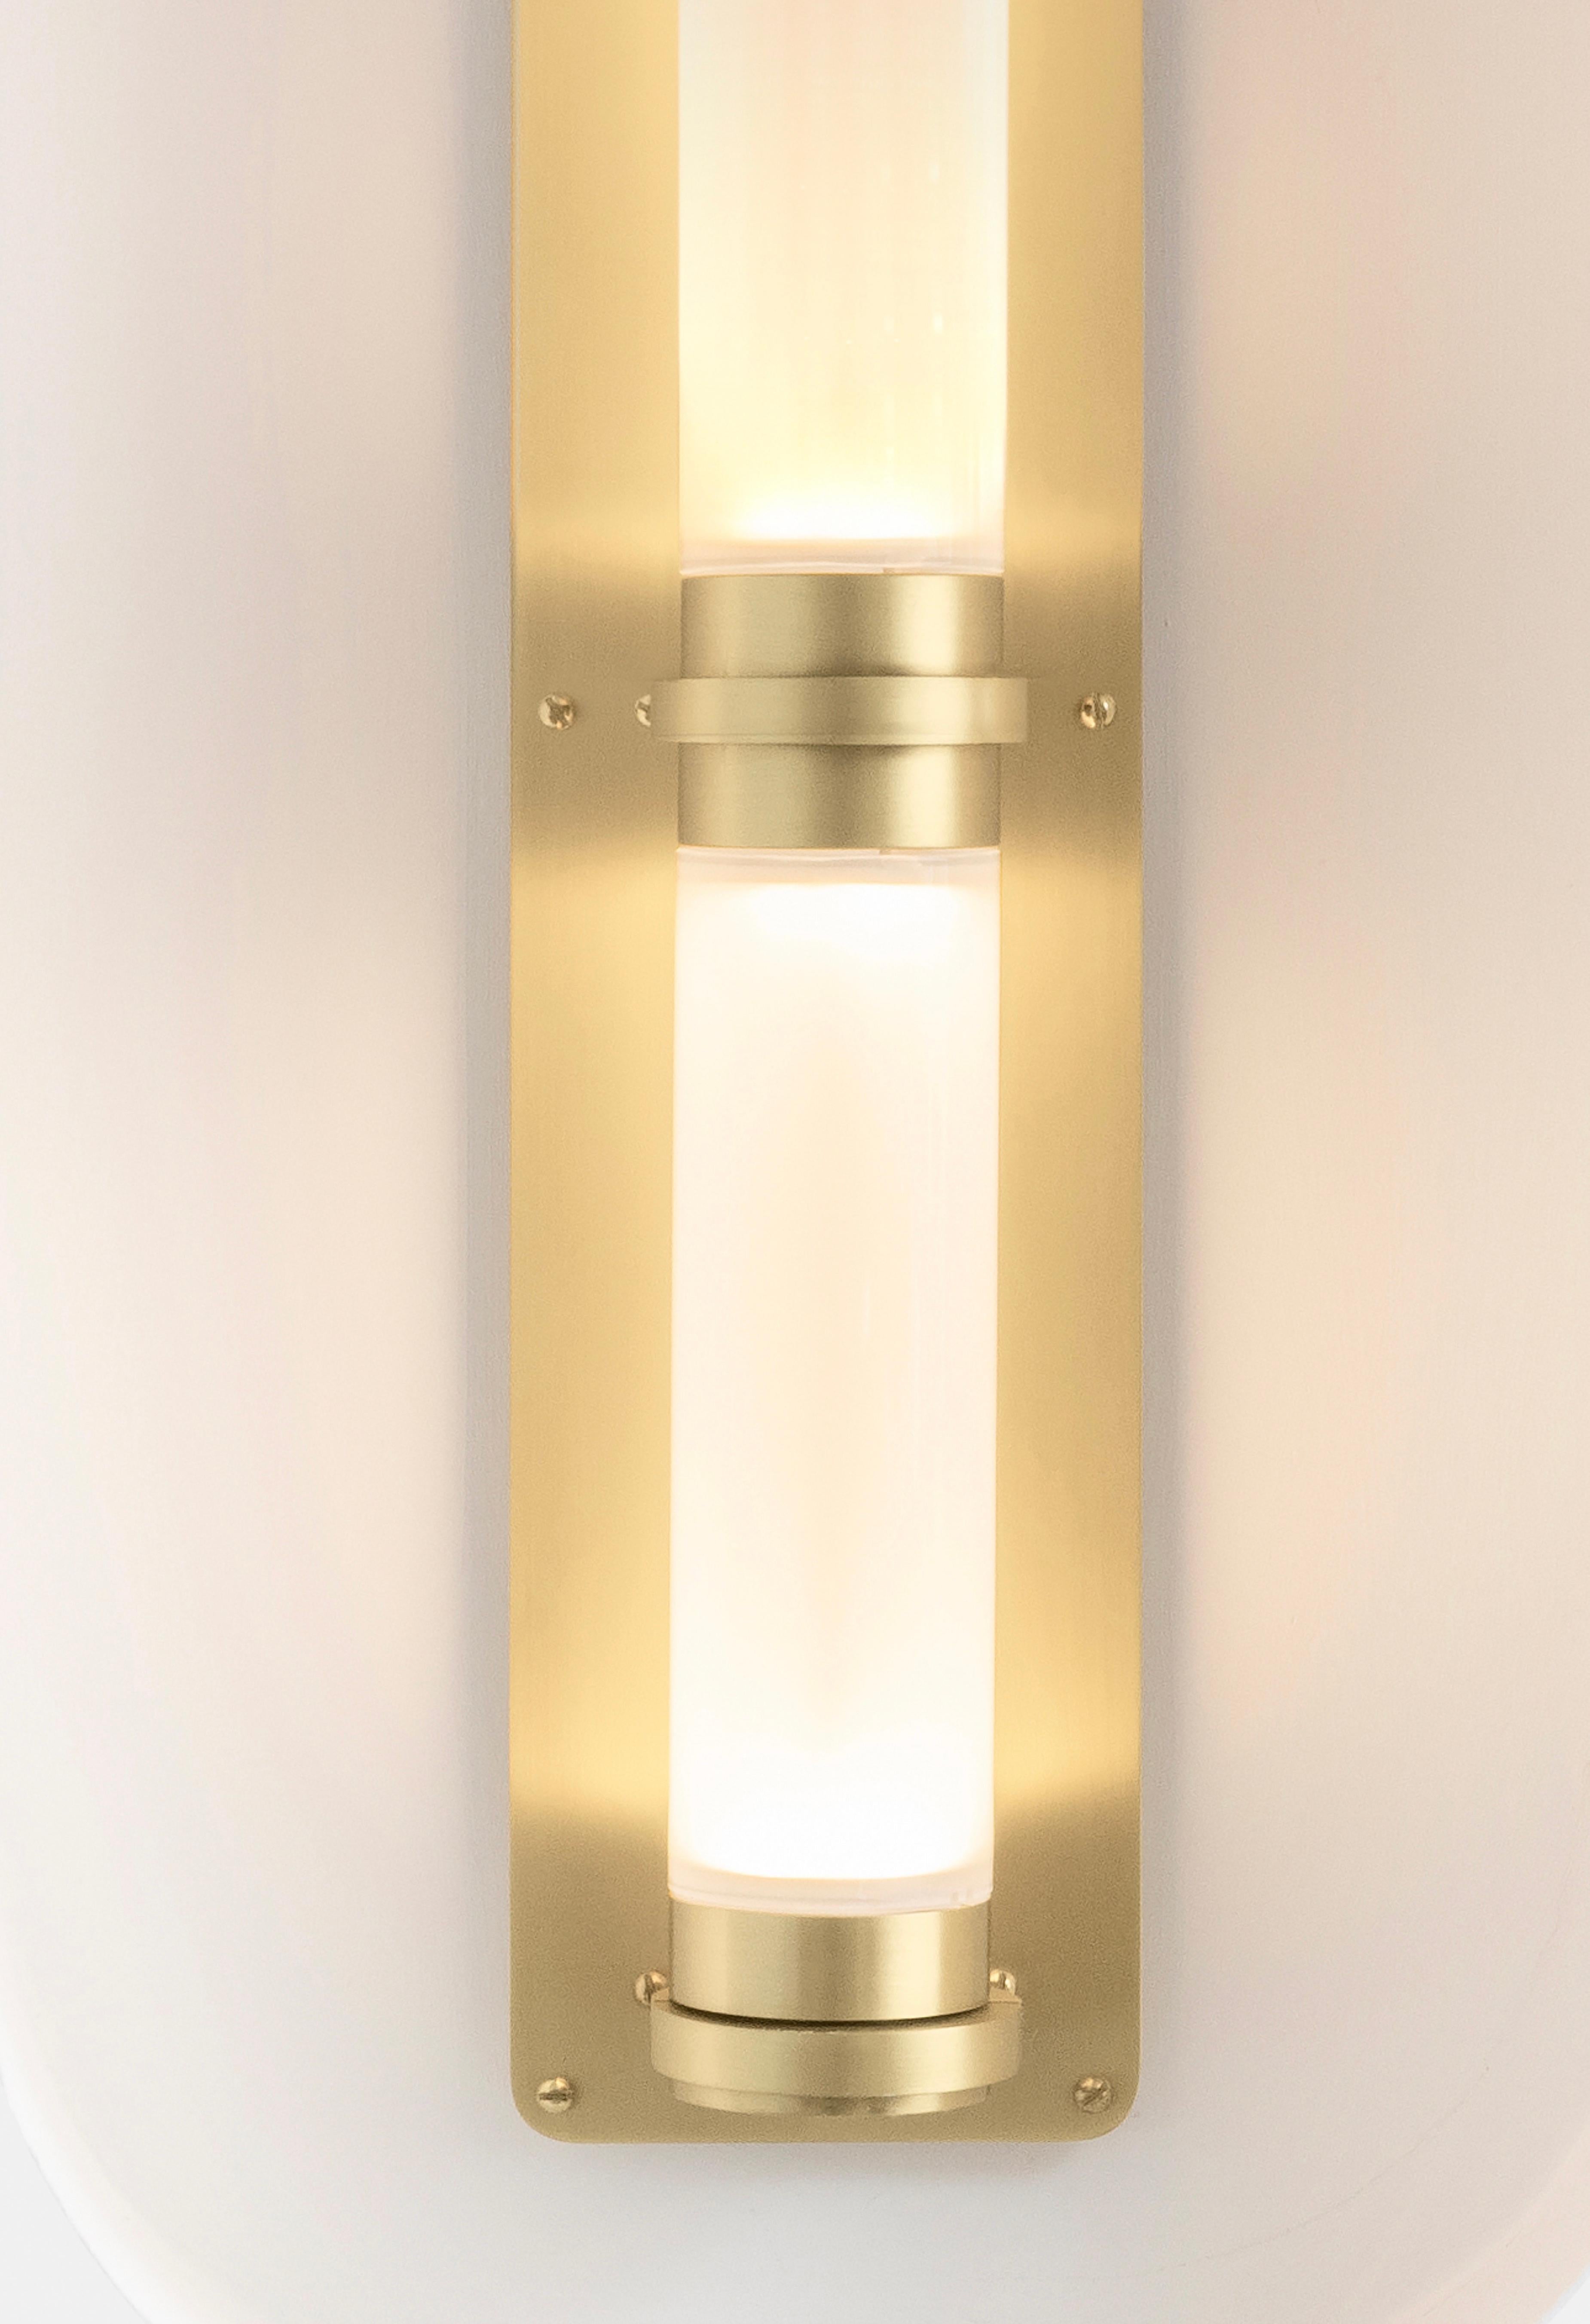 A lighting system with infinite interpretations, the Luna Sconce is an elegant and refined lighting option. Handmade with Gabriel Scott's signature metal and glass combination, this is one of the studio's most popular sconce options.